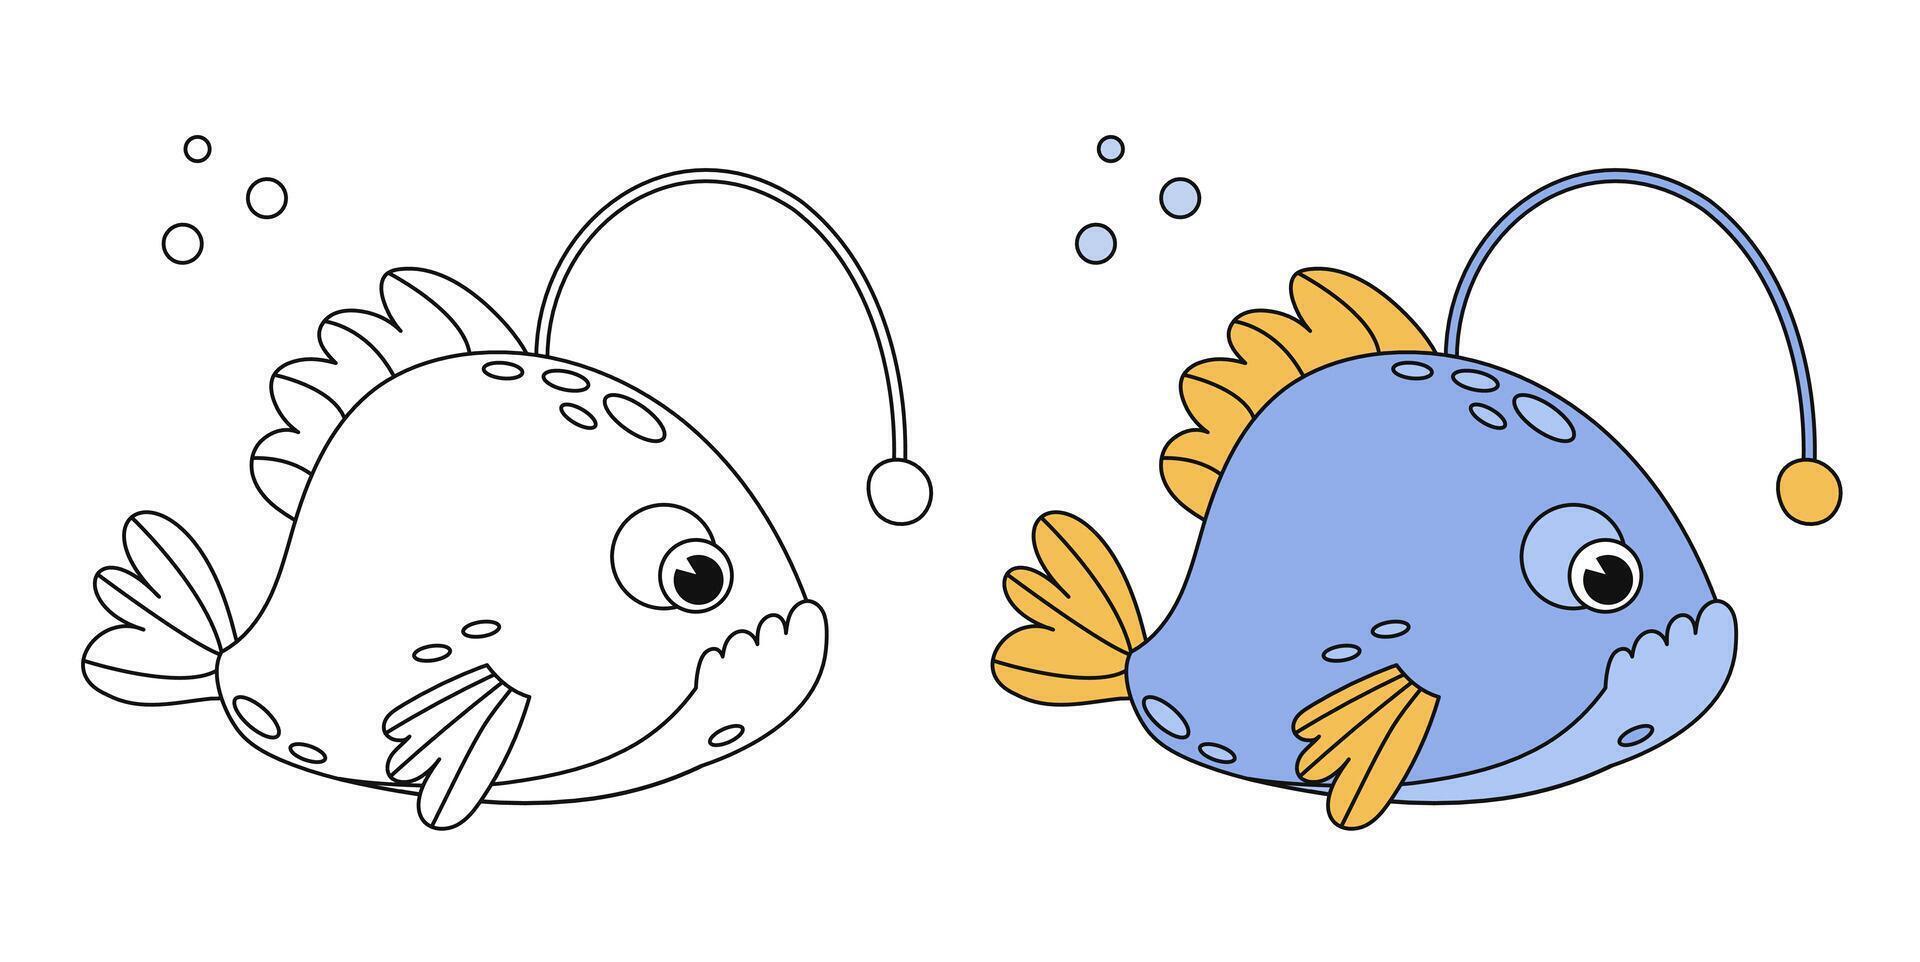 Cute fish cartoon coloring page illustration vector. For kids coloring book. Monochrome and color version. Vector childrens illustration